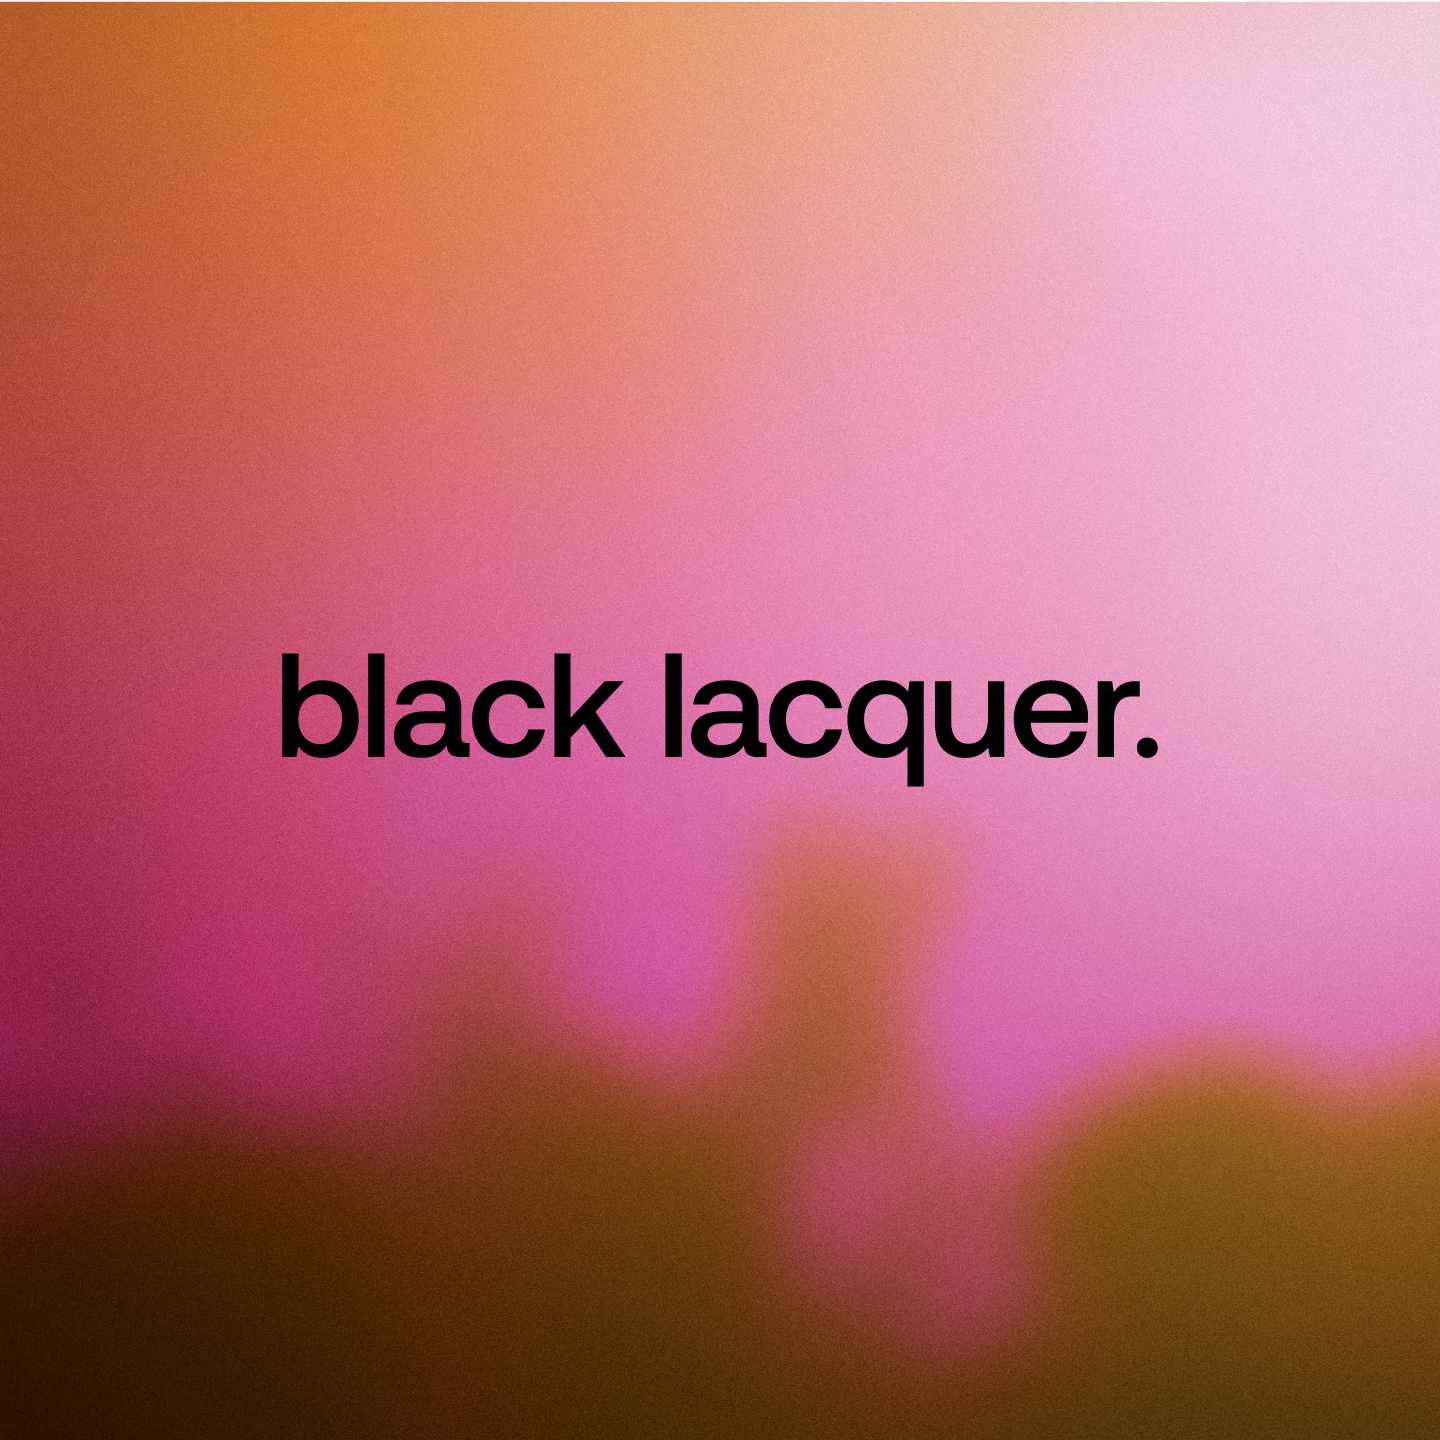 Ombre pink background with words 'black lacquer.' written in black font